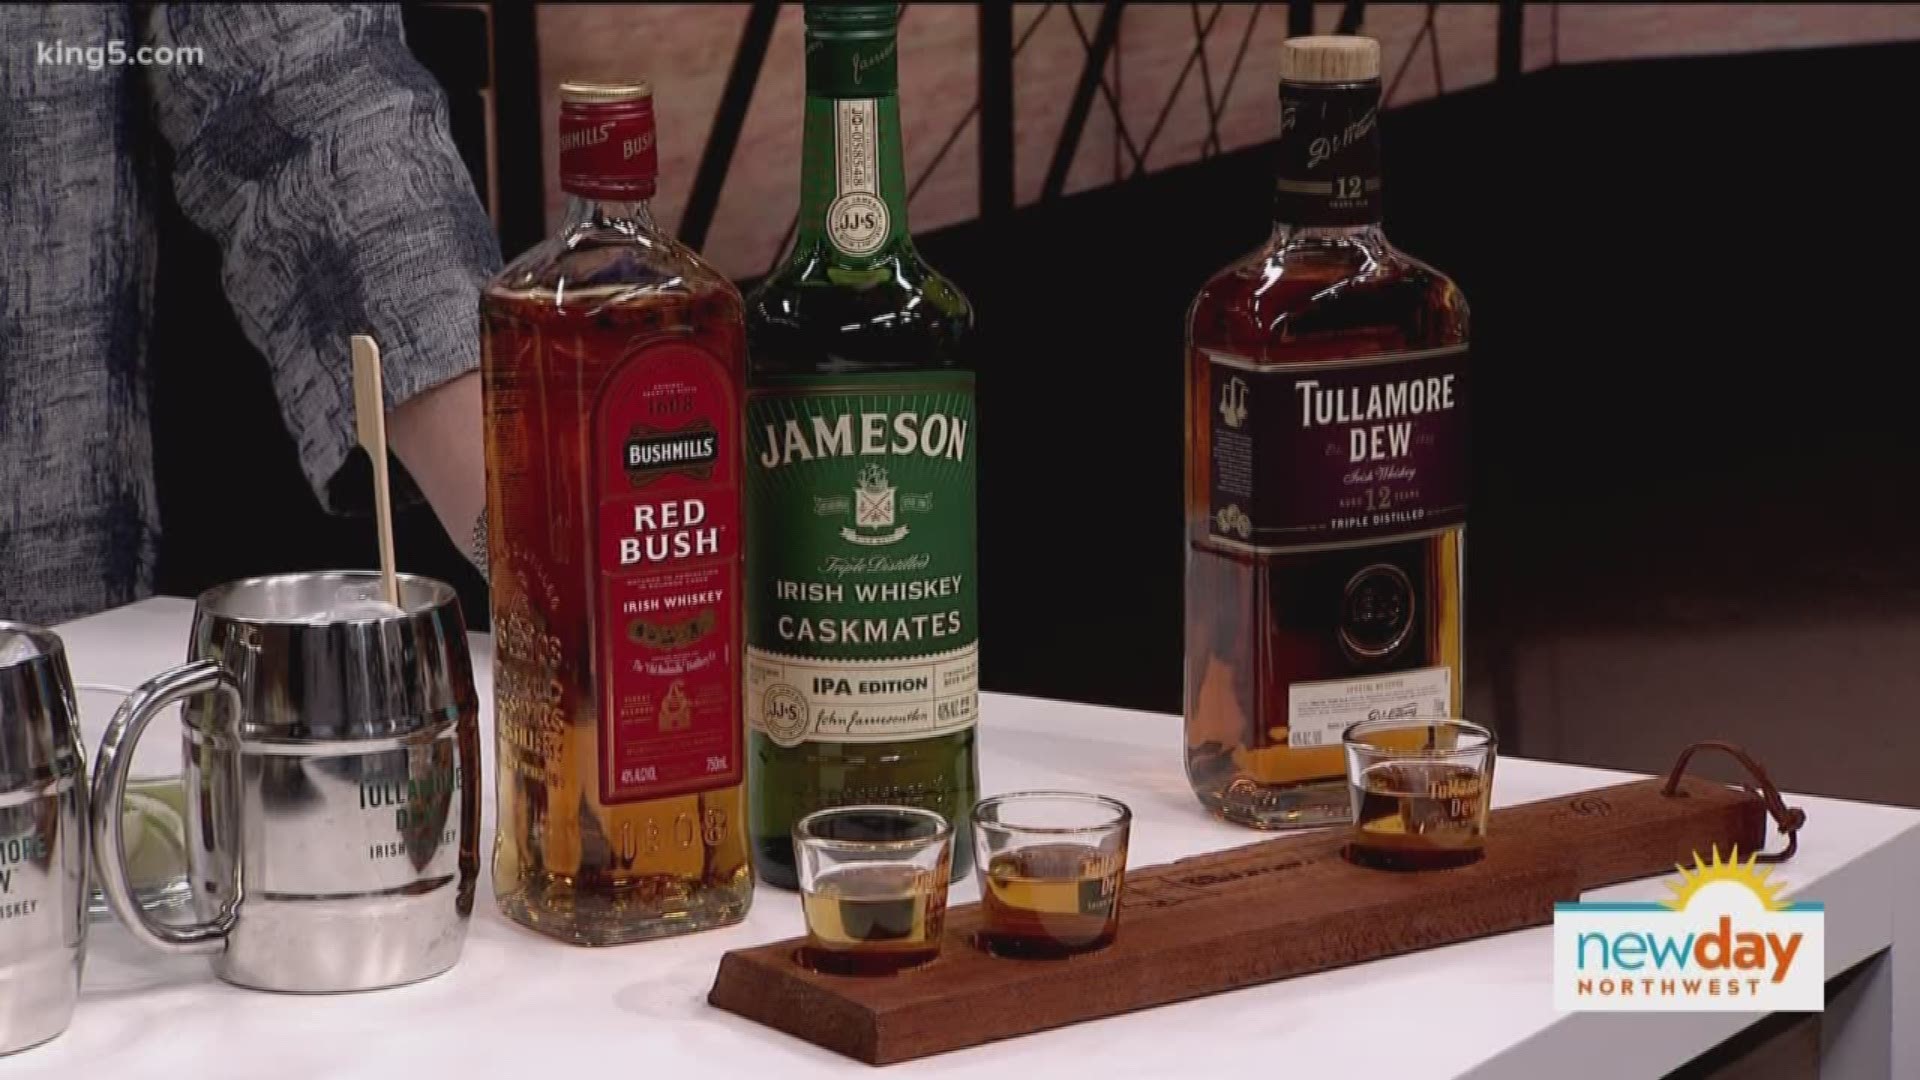 An Irish whiskey is integral to a St. Patty's day party.